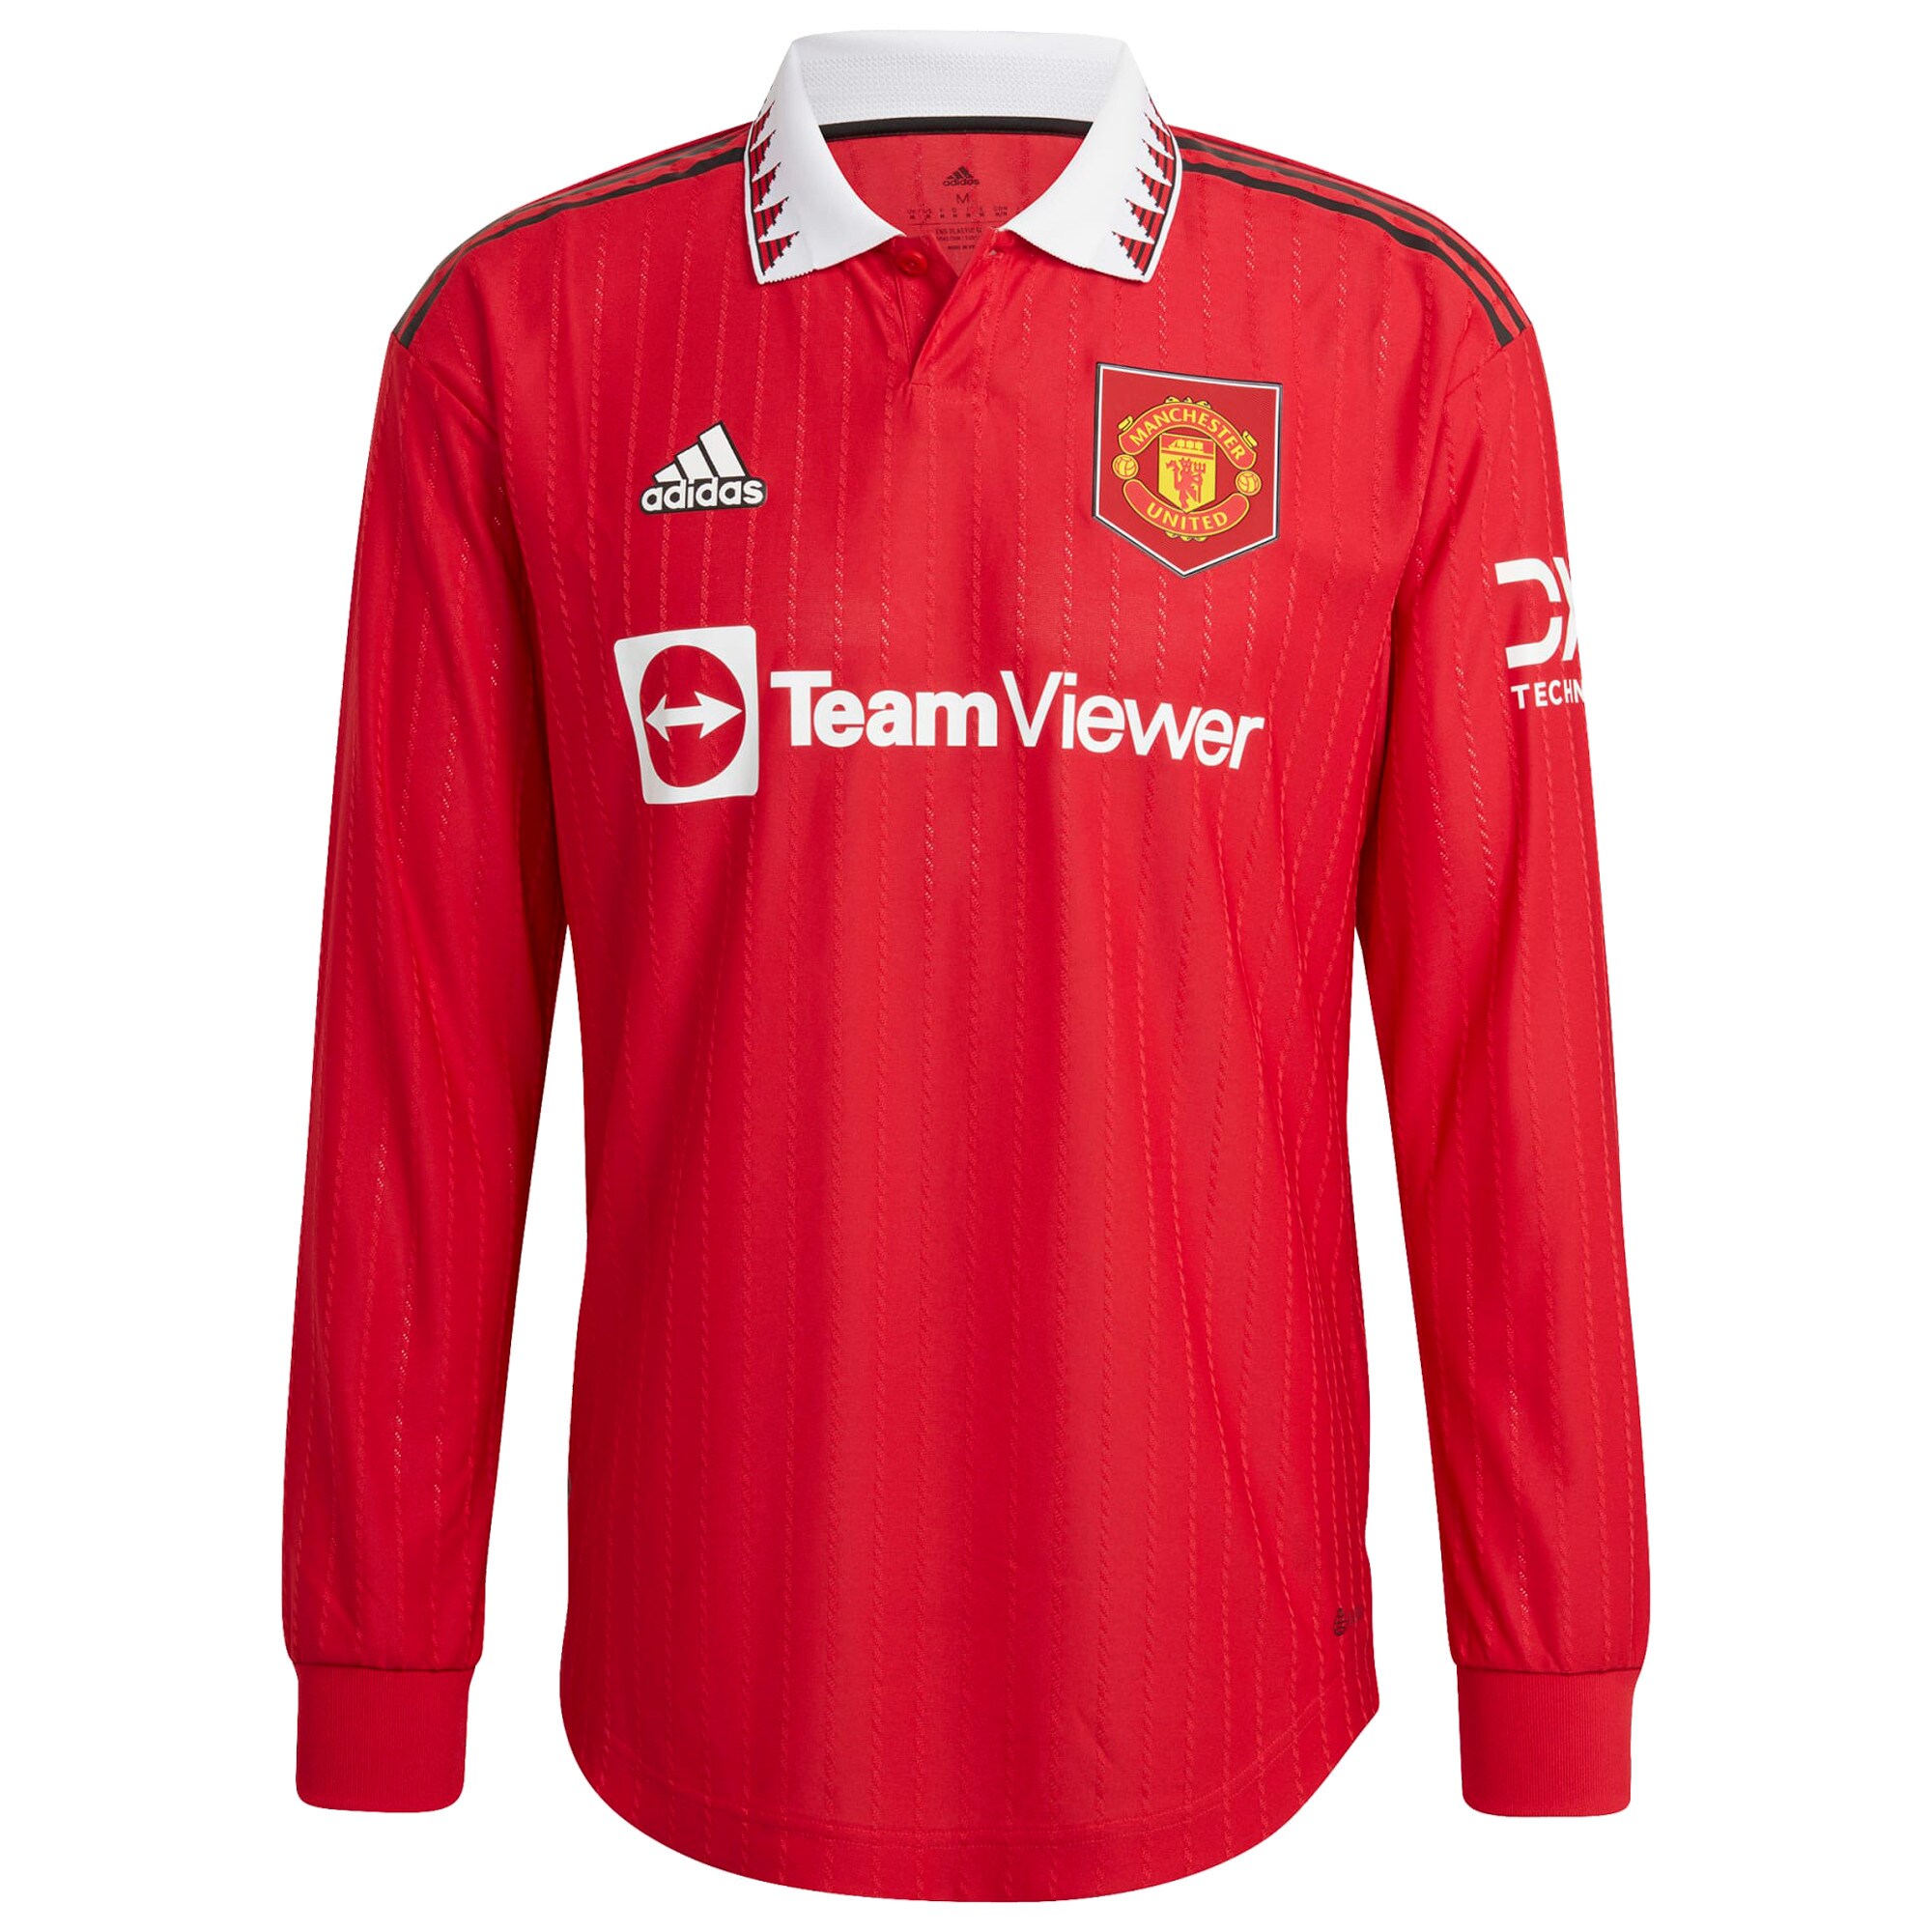 Manchester United Cup Home Authentic Shirt 2022-23 - Long Sleeve with Dalot 20 printing